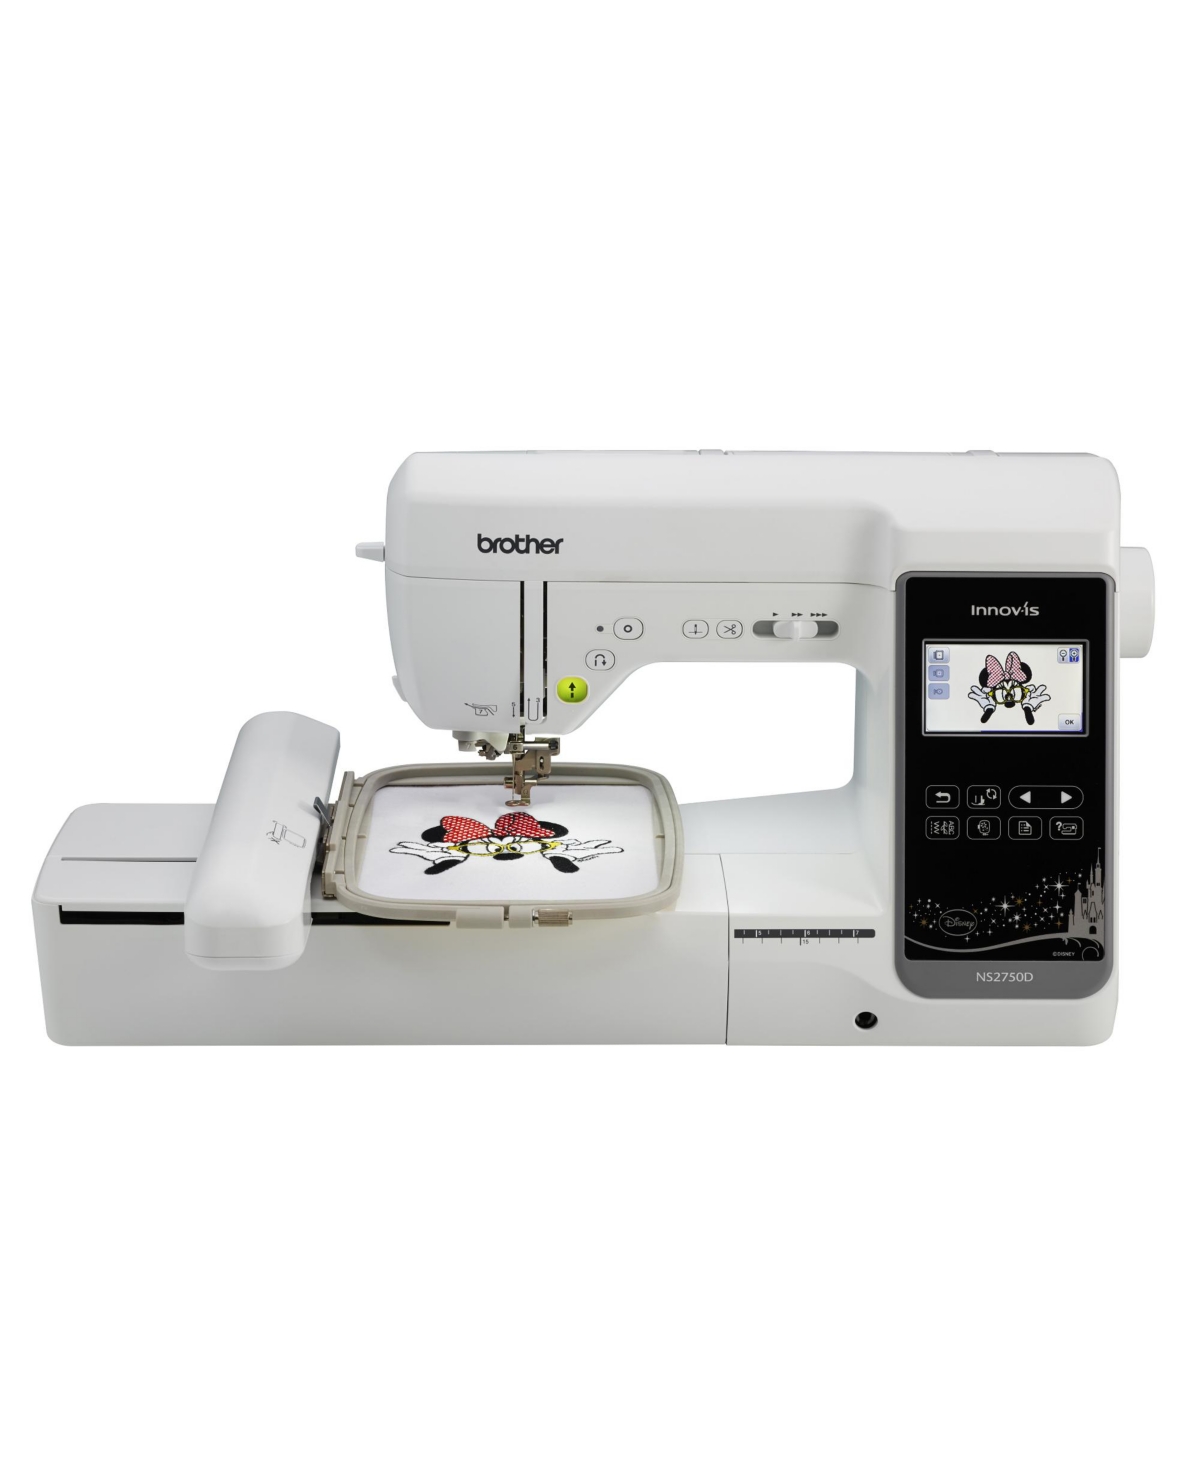 NS2750D 5" x 7" Computerized Sewing & Embroidery Machine with Disney Designs - White